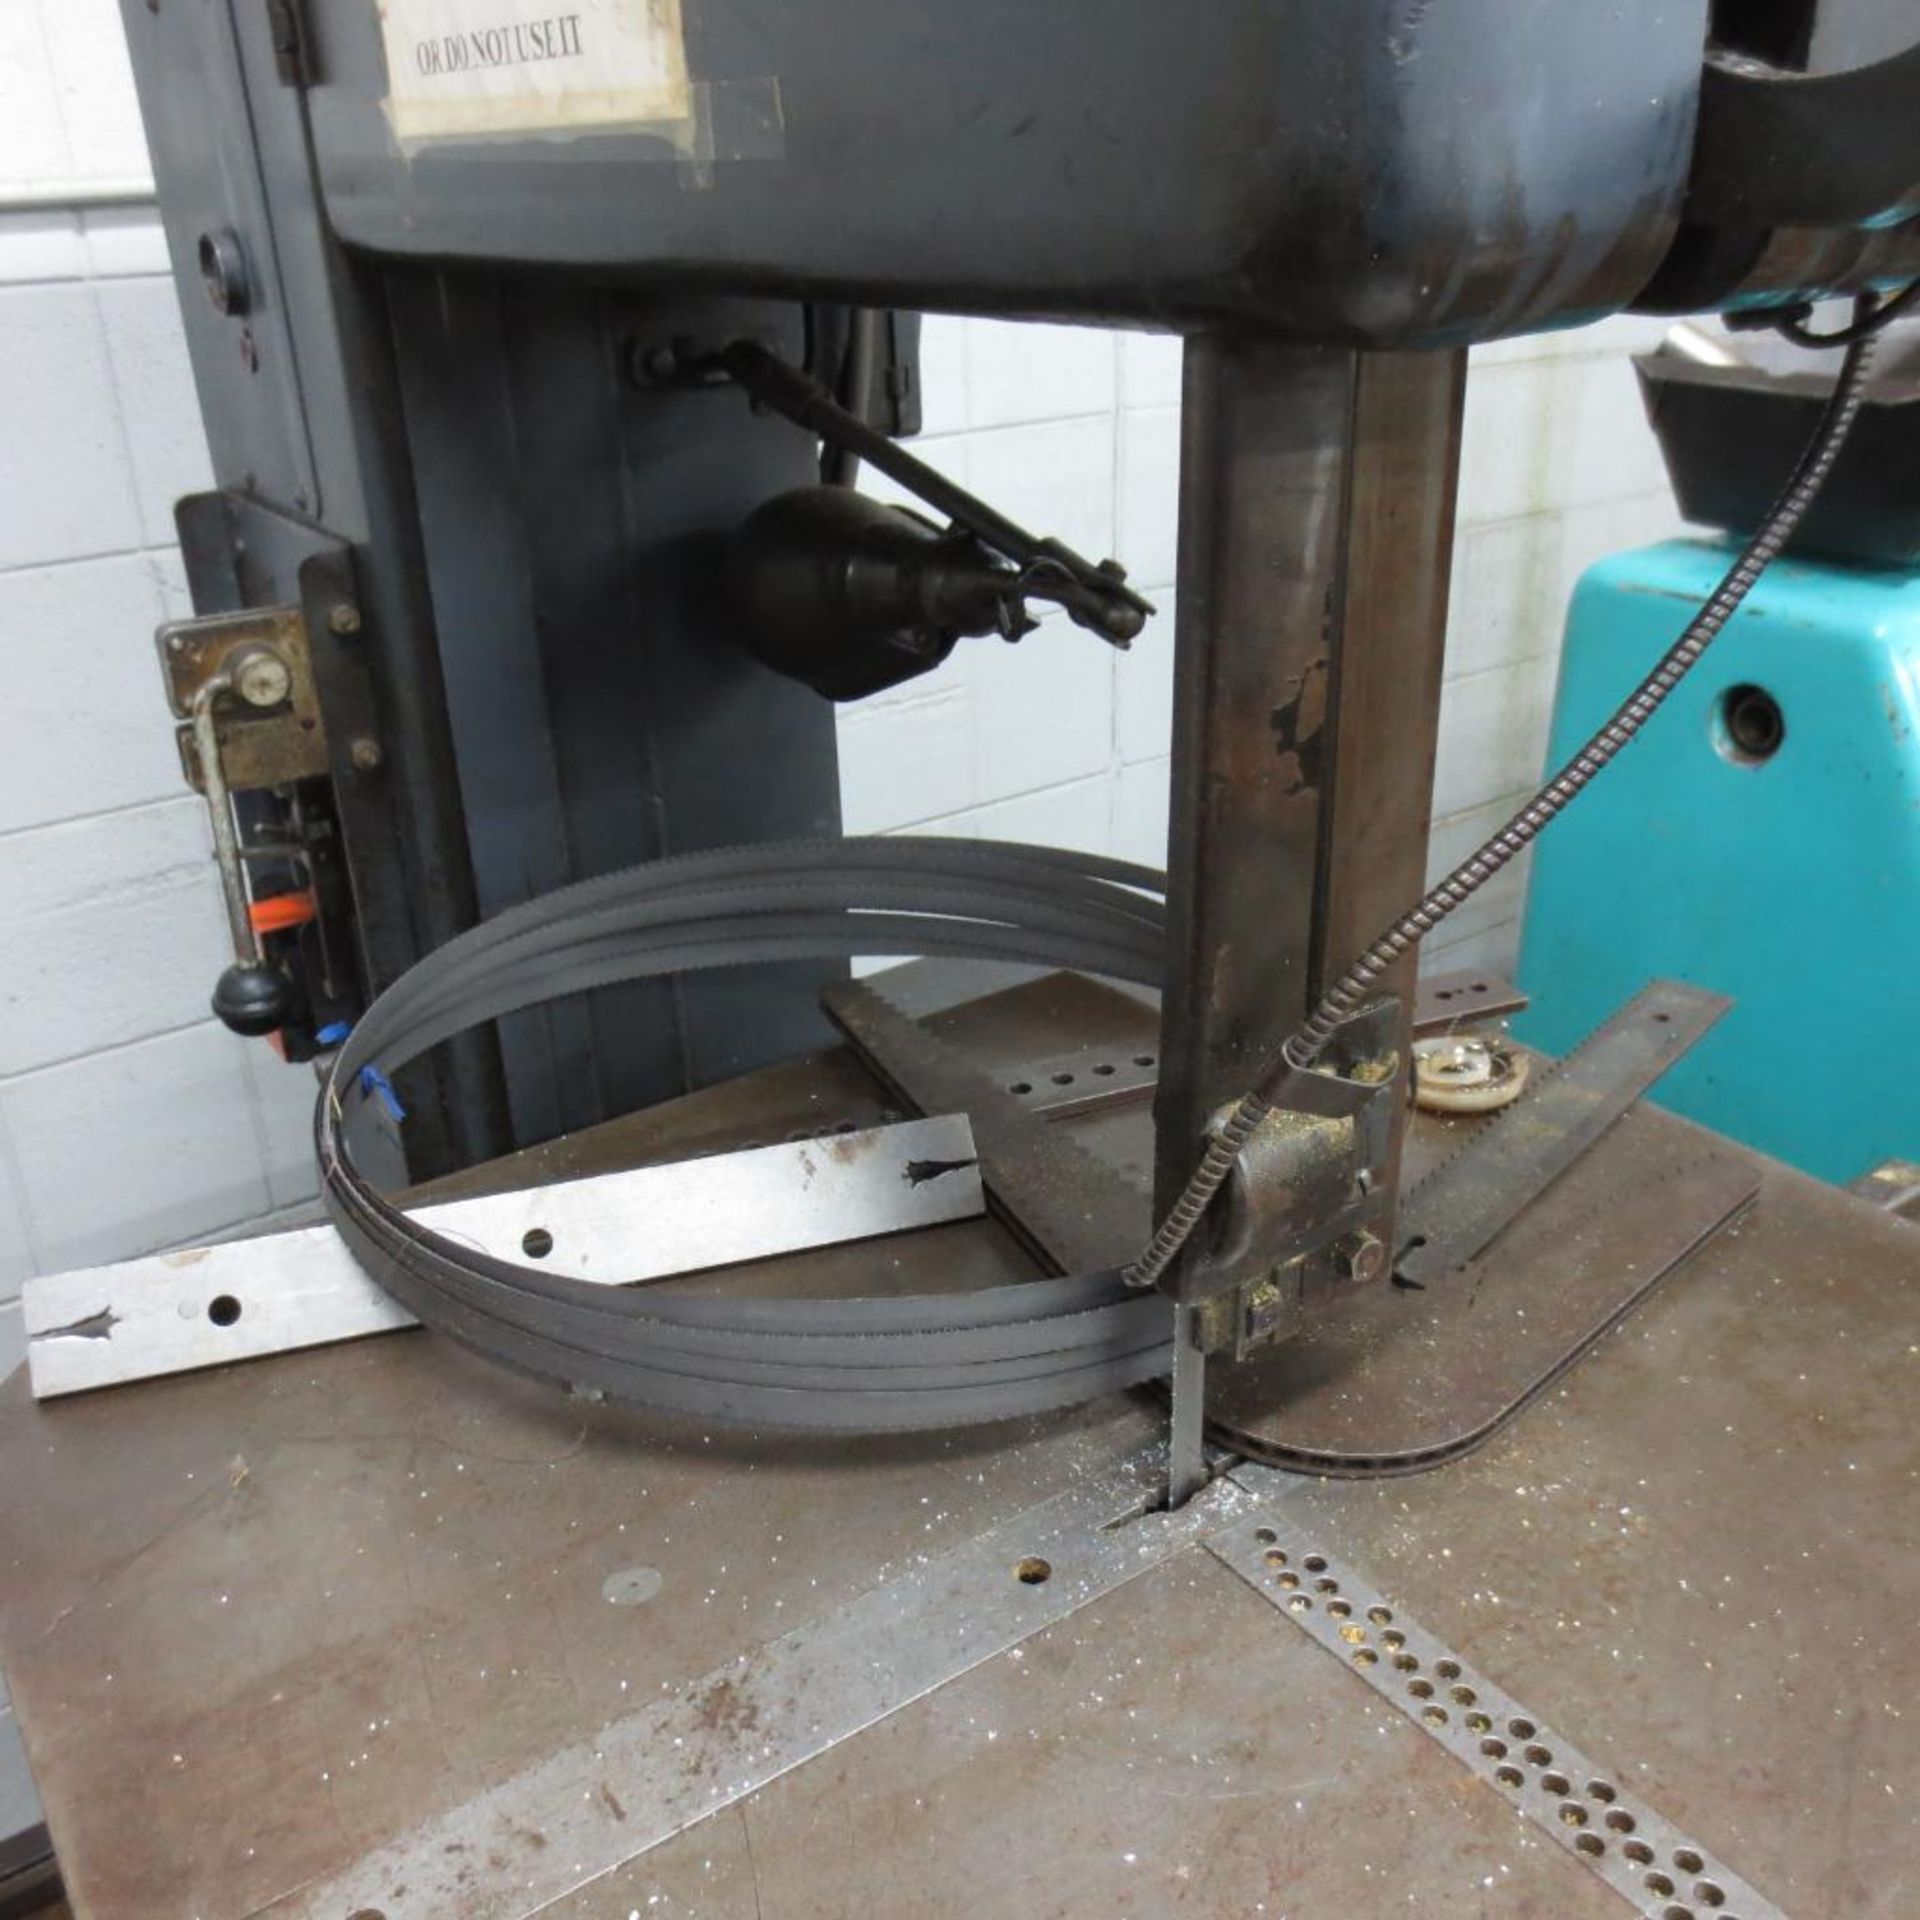 Grob No. NS18 Vertical Band Saw, 24" X 24" Table, 18" Throat *RIGGING $150* - Image 4 of 4